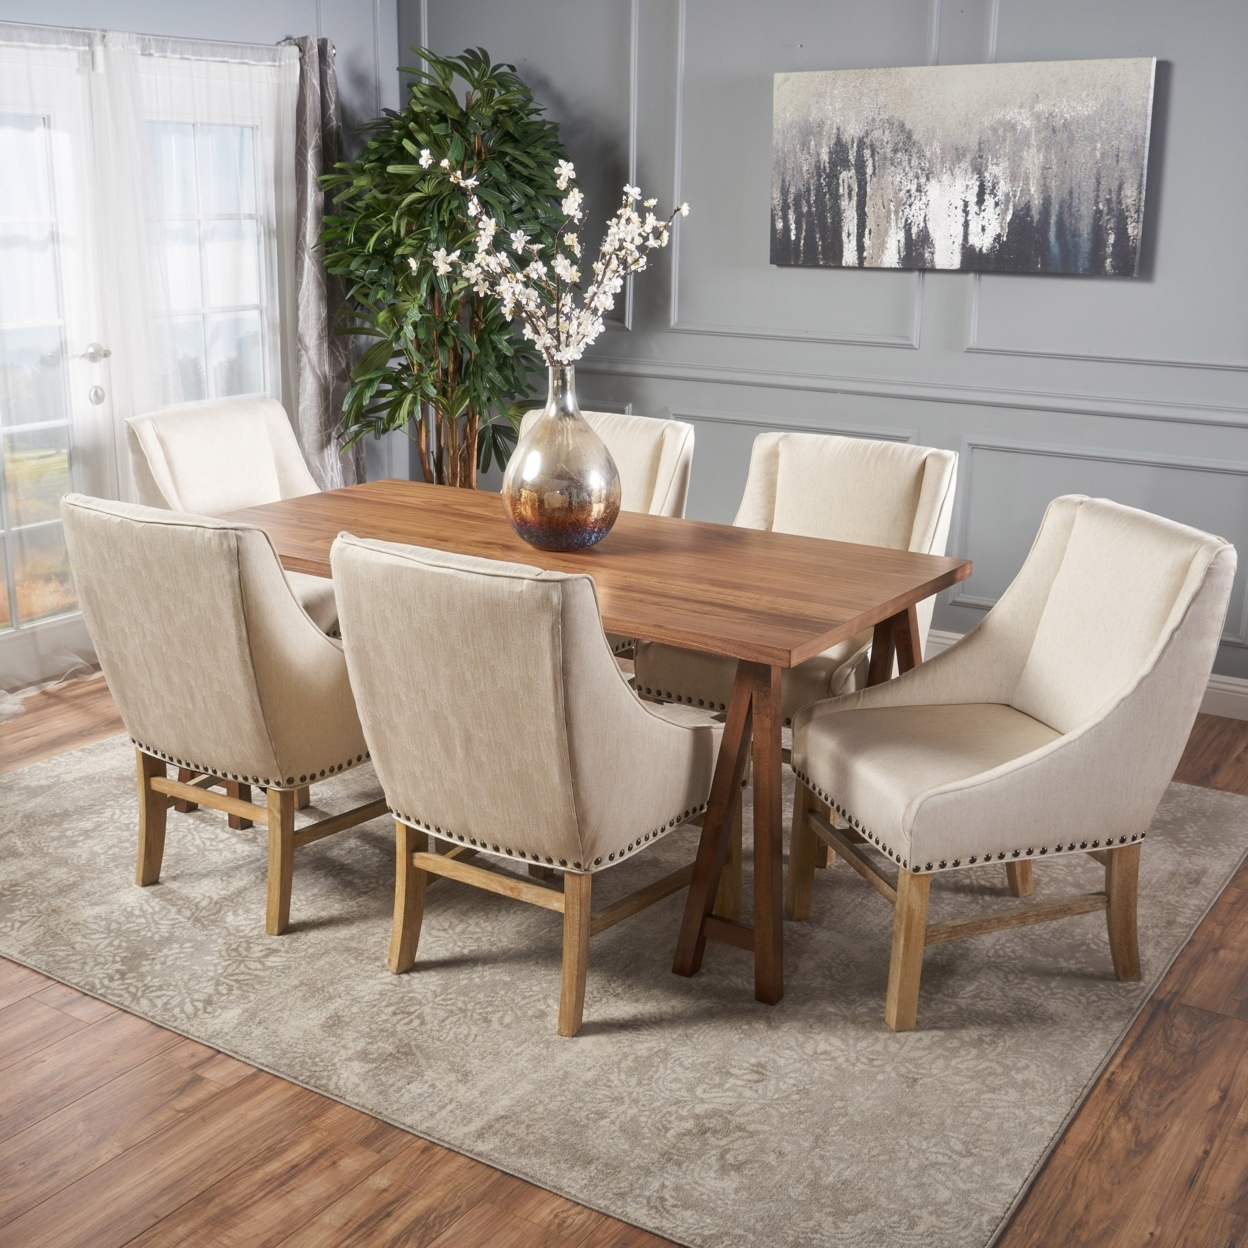 Sandor Farmhouse 7 Piece Dining Set With Fabric Dining Chairs - Natural